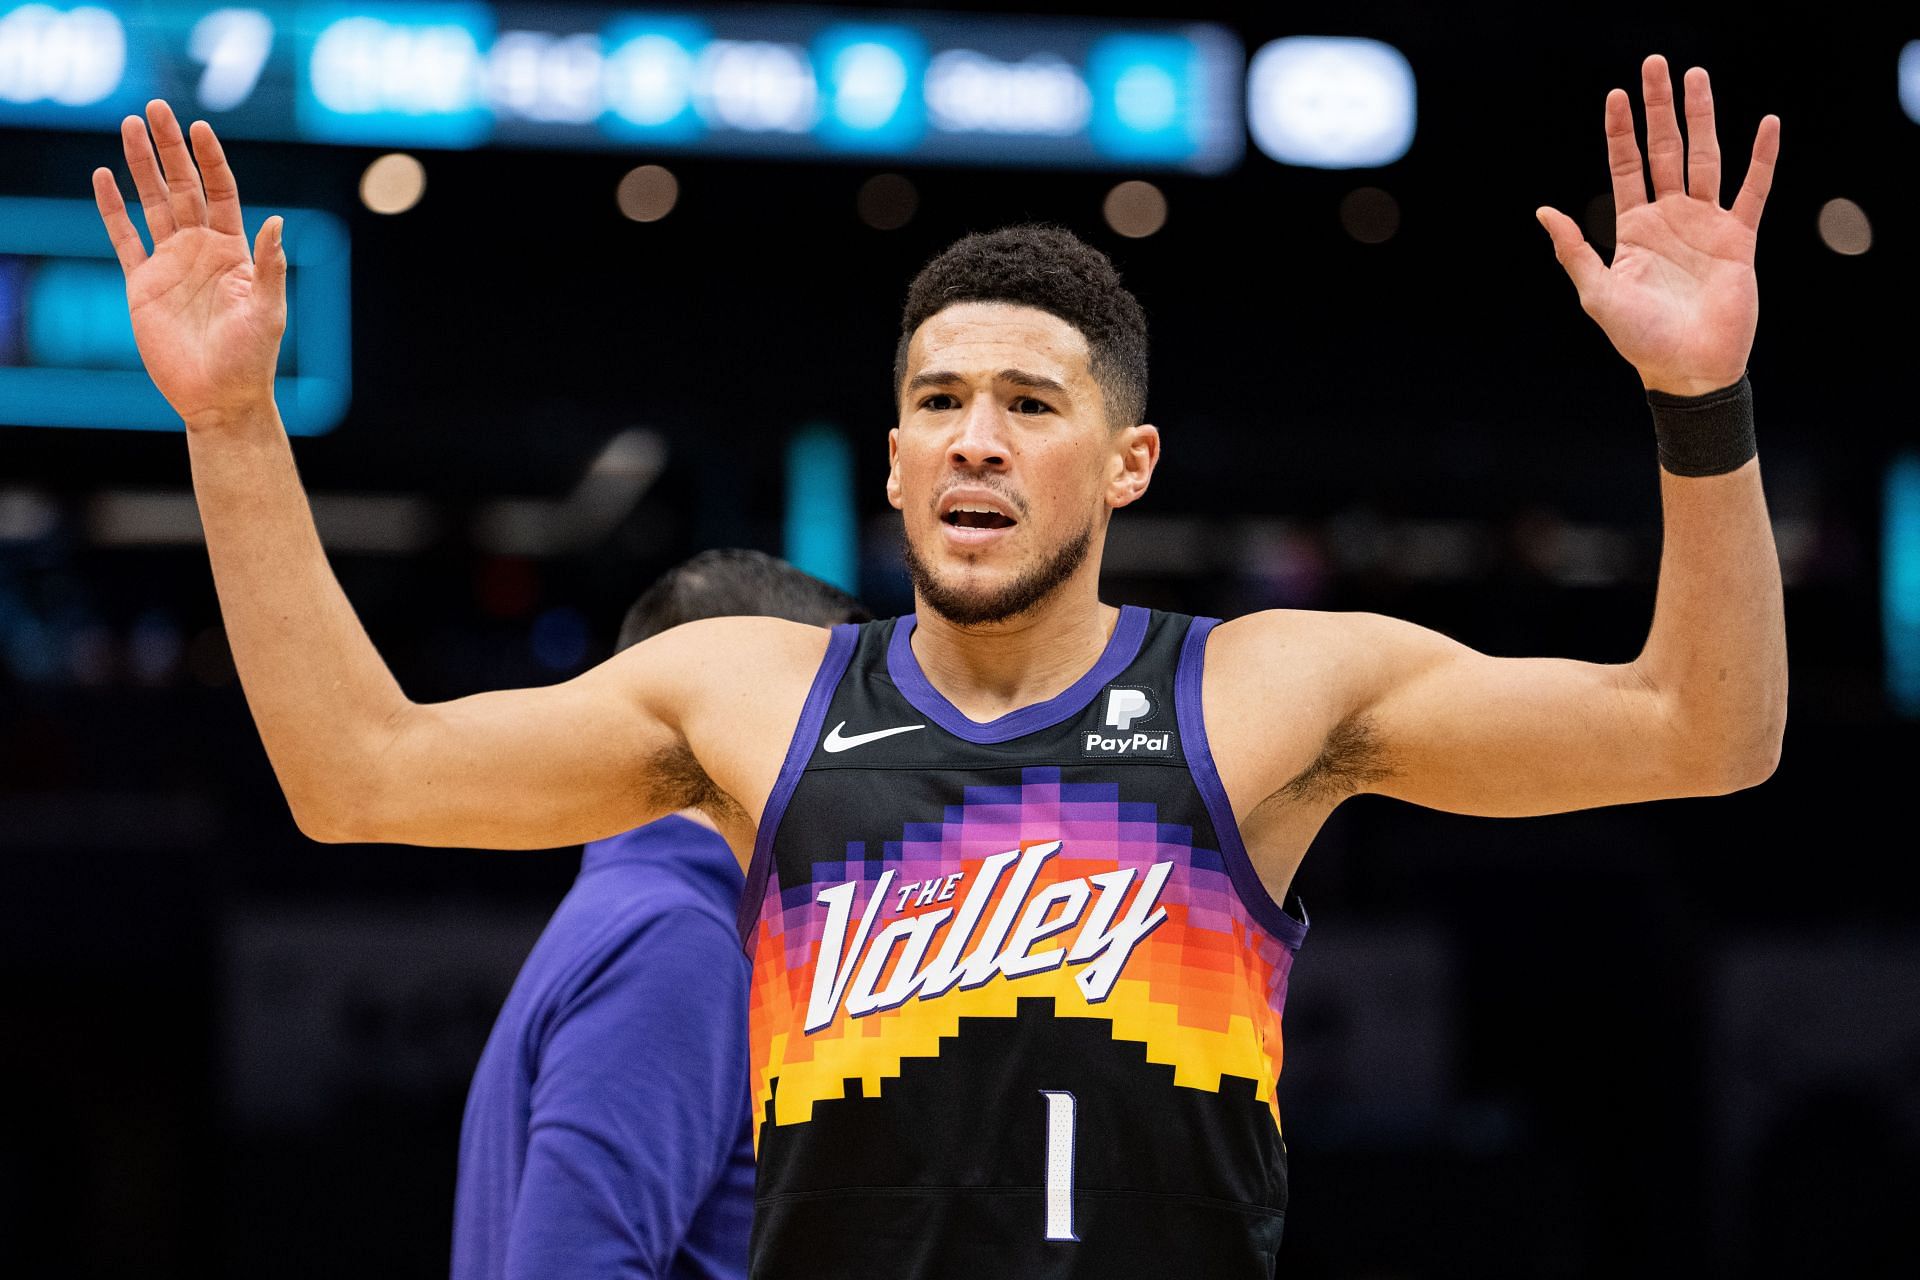 Phoenix Suns superstar guard Devin Booker has continued to impress